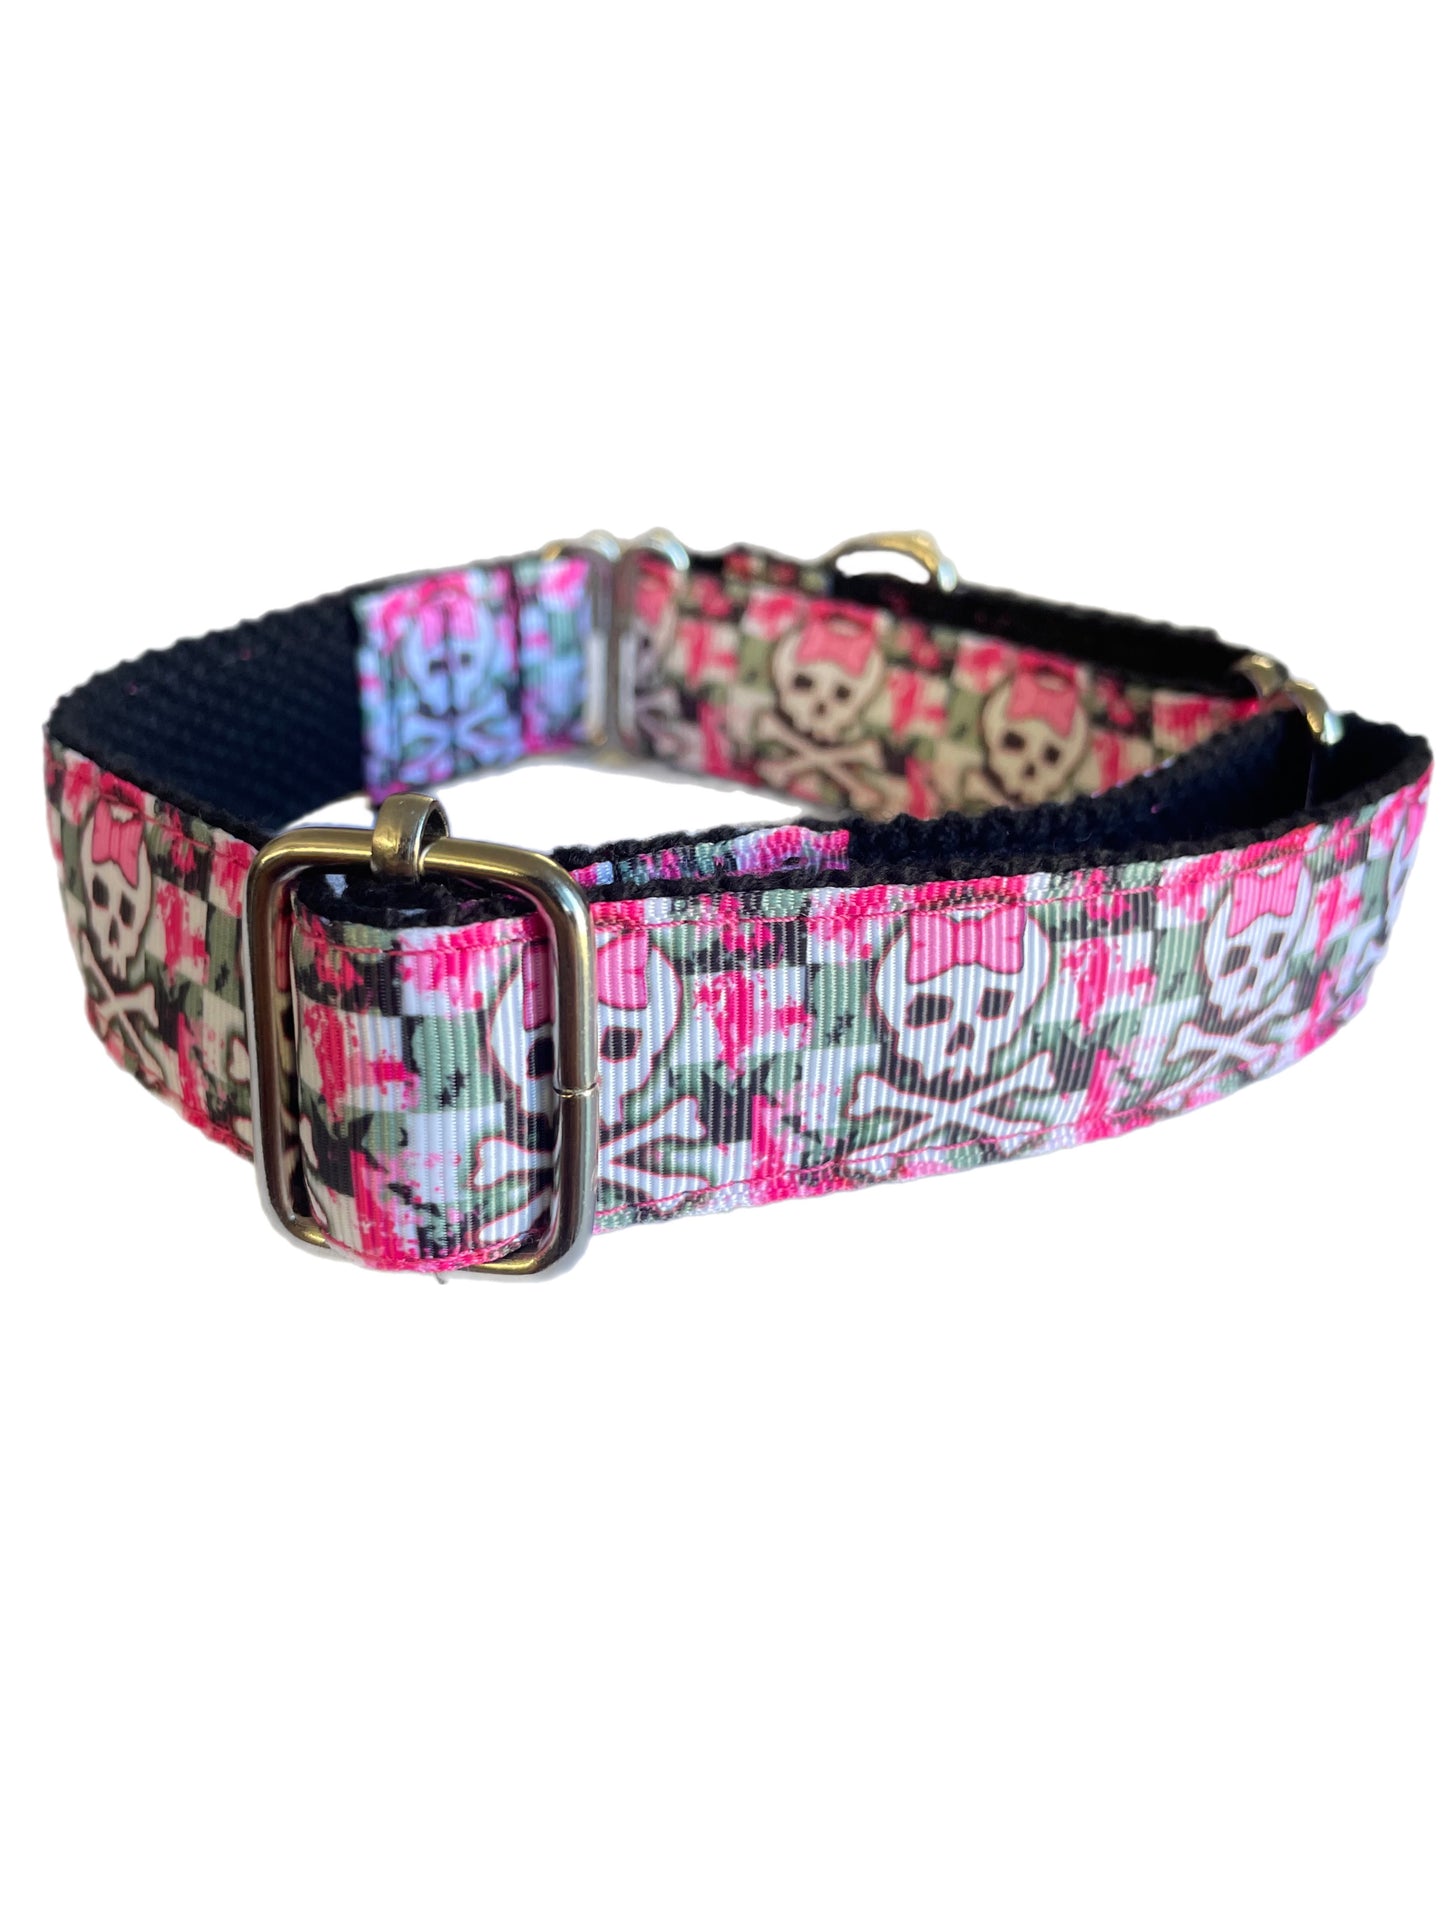 Greyhound Martingale 25mm house collar in pink with cute skulls